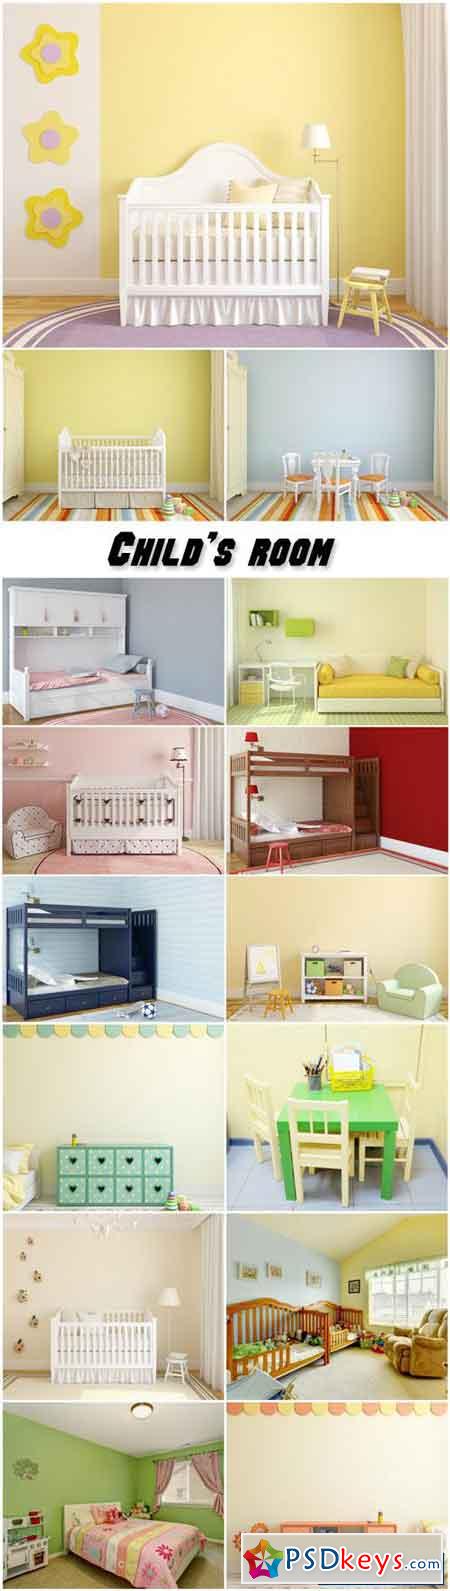 Child's room, bed and a table